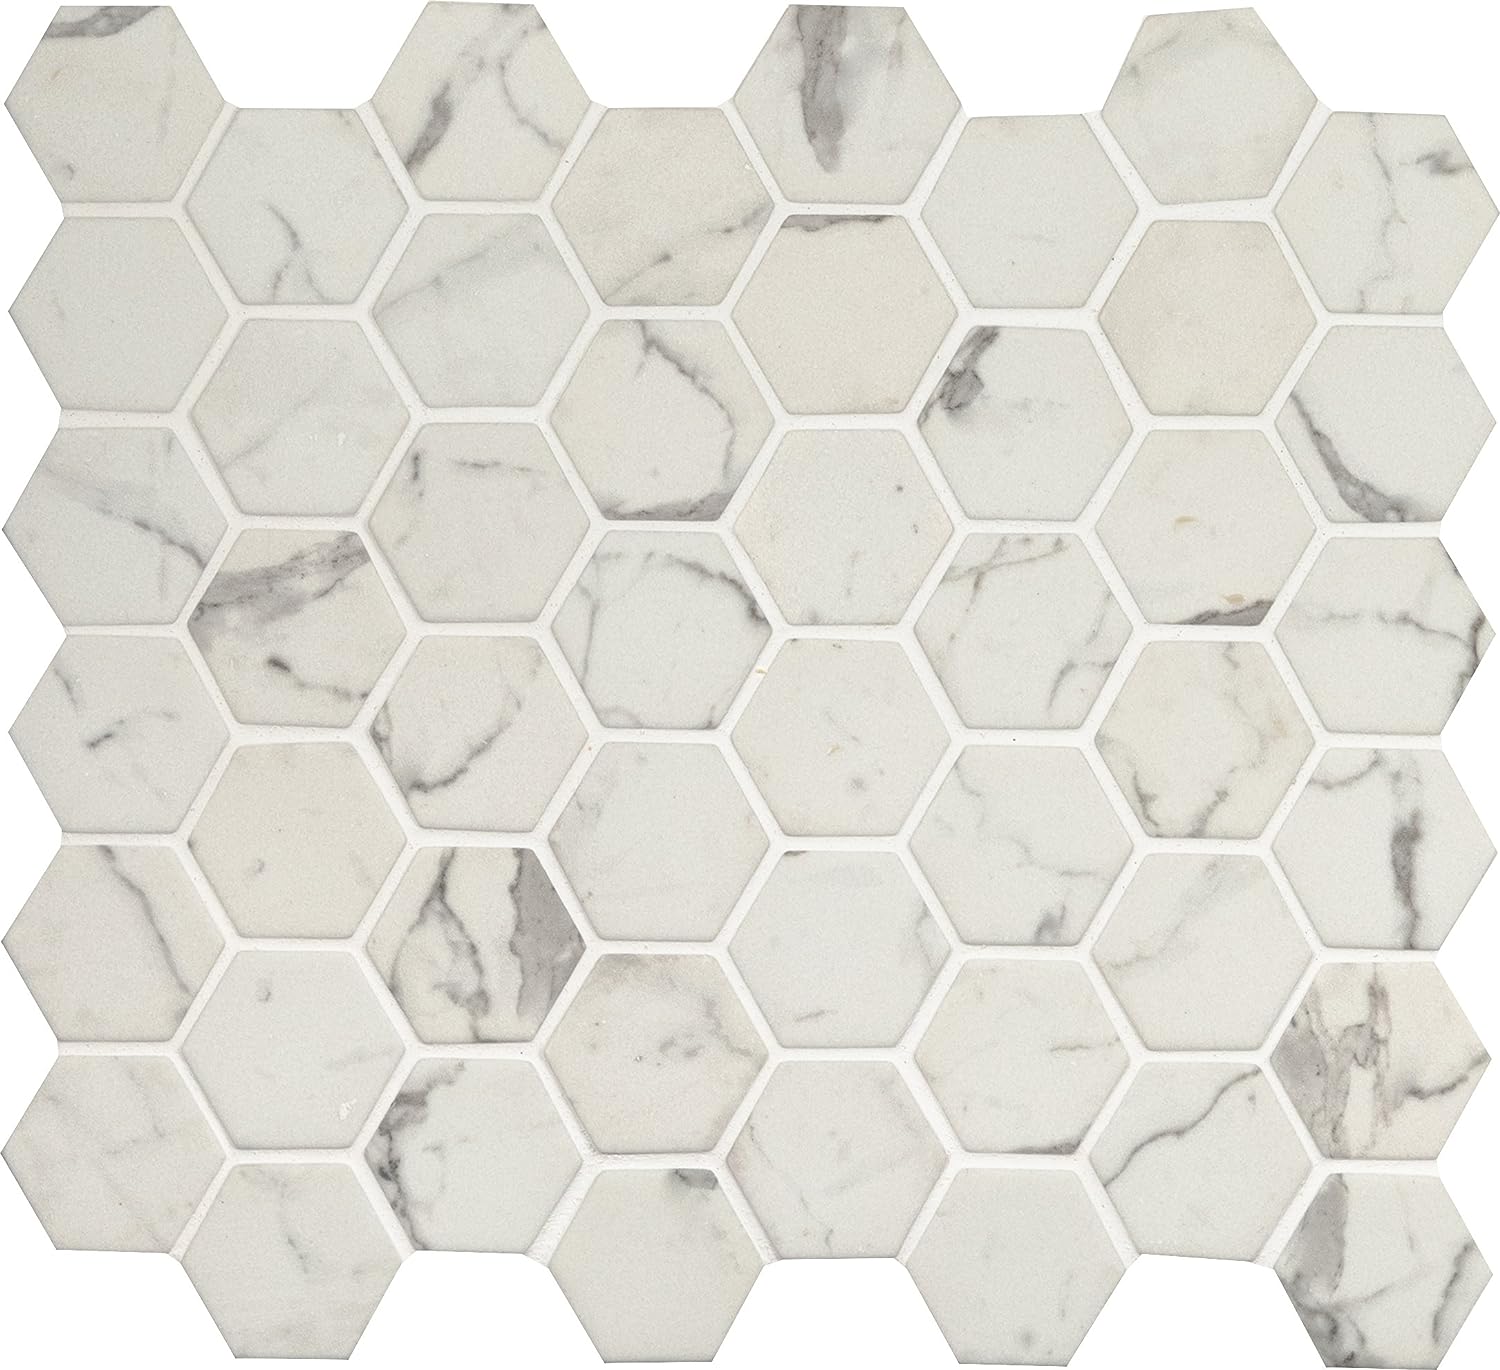 MS International GLS-STACEL6MM Mesh-Mounted Tile Mosaic Recycled Wall Glass Tile (Box of 15 Sheets)